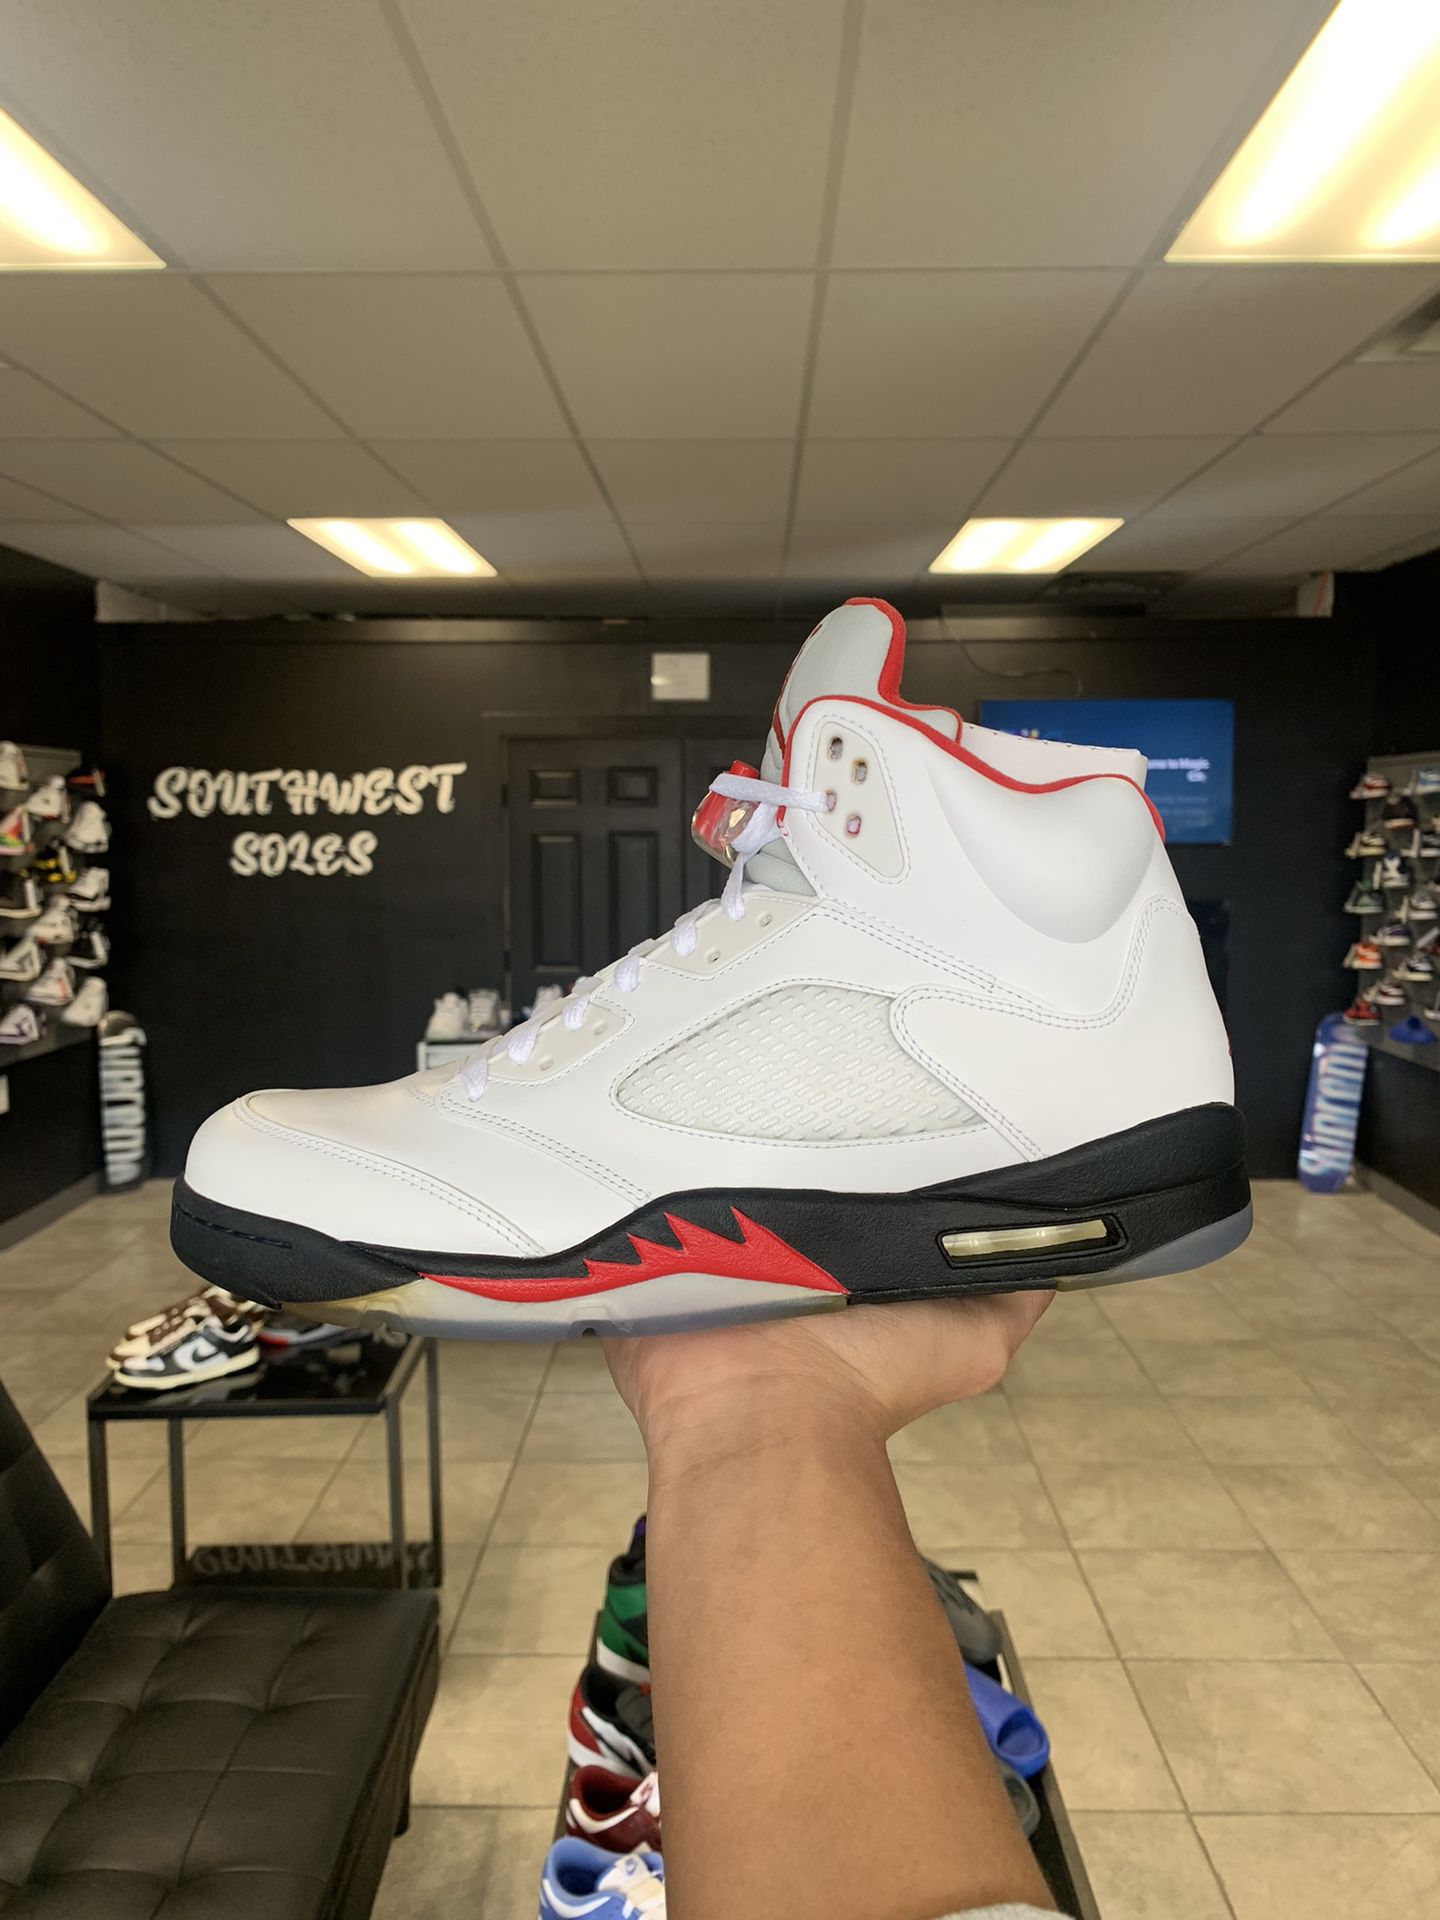 Jordan 5 Fire Red (2013) Size 13 Available In Store!